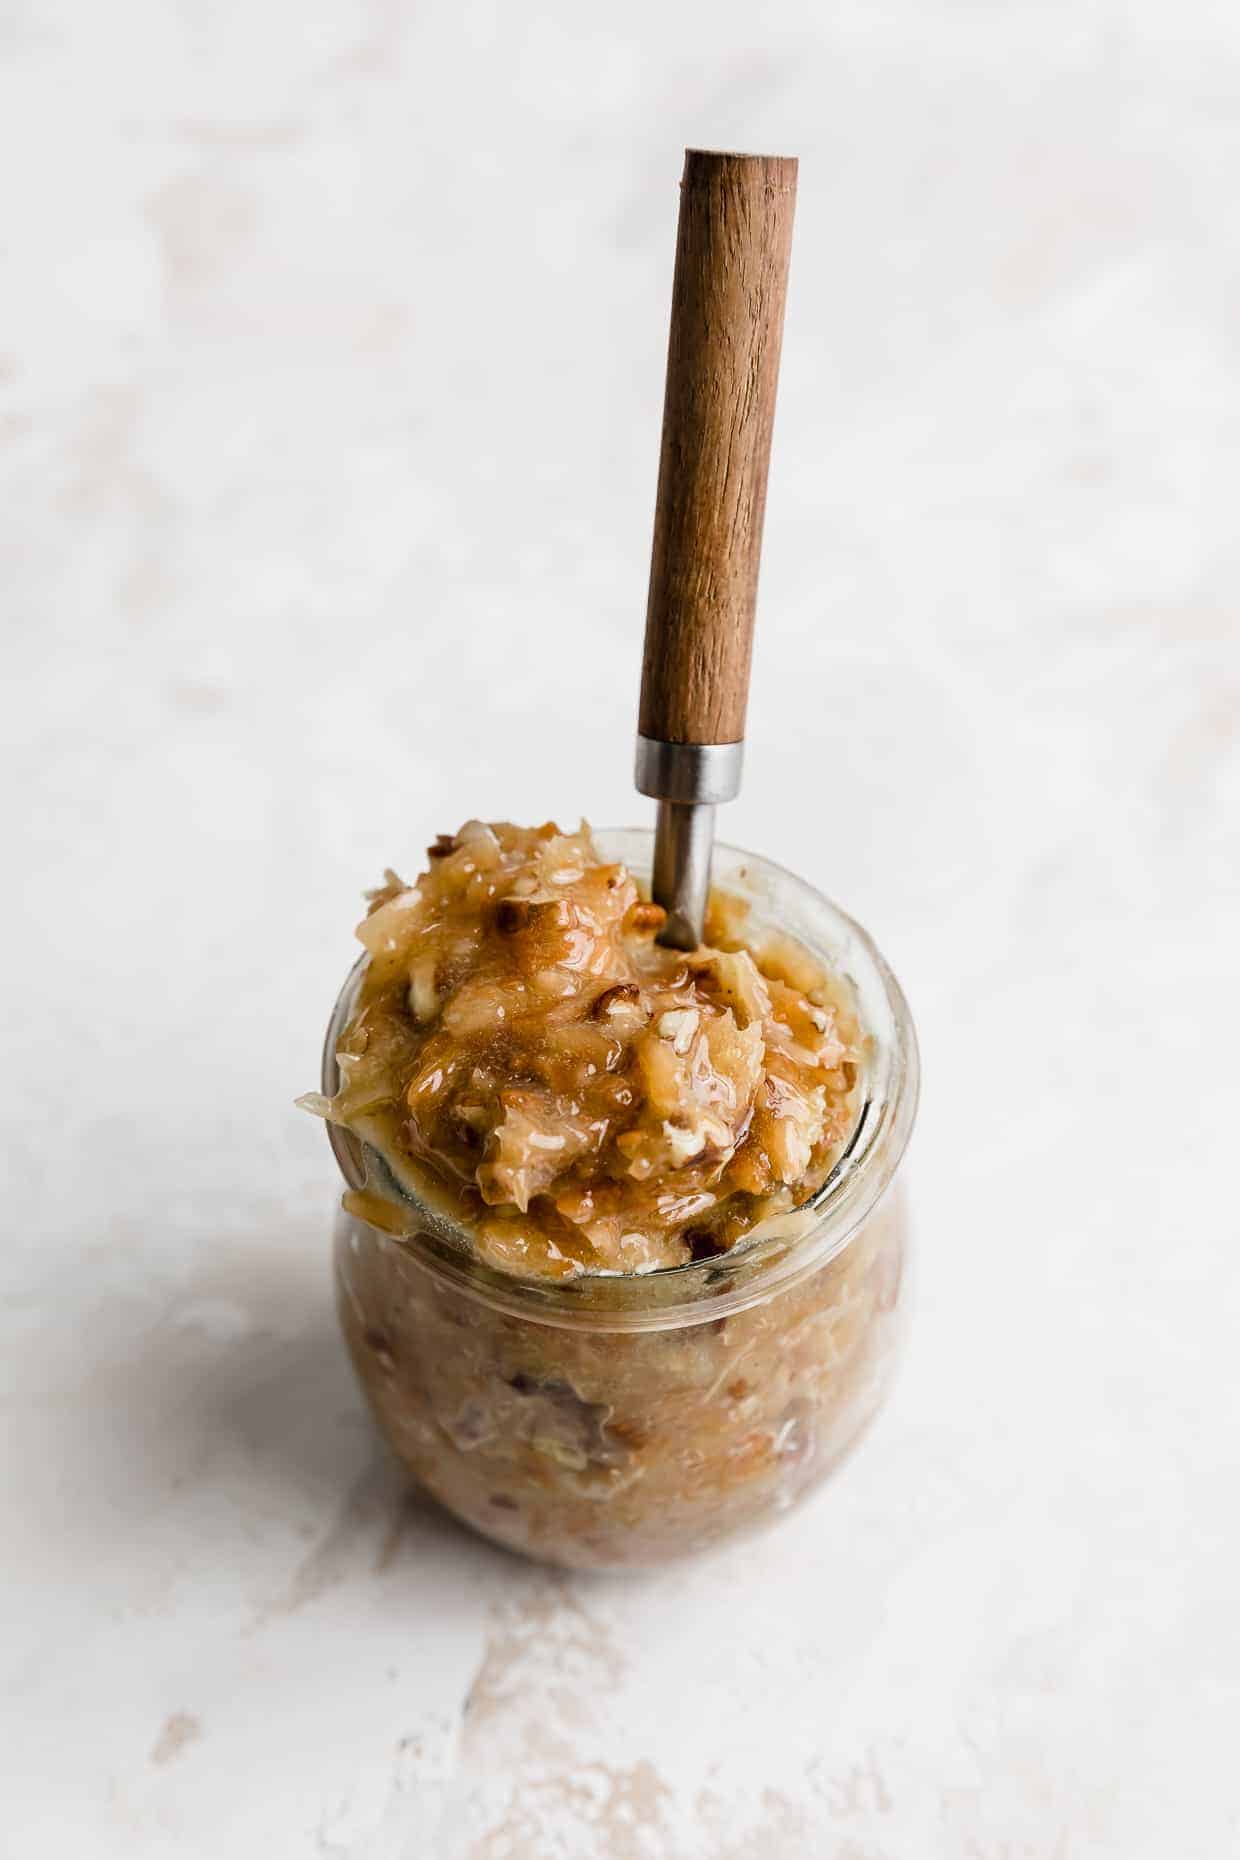 A small glass jar full of German Chocolate Cake frosting with a spoon sticking in the jar too.